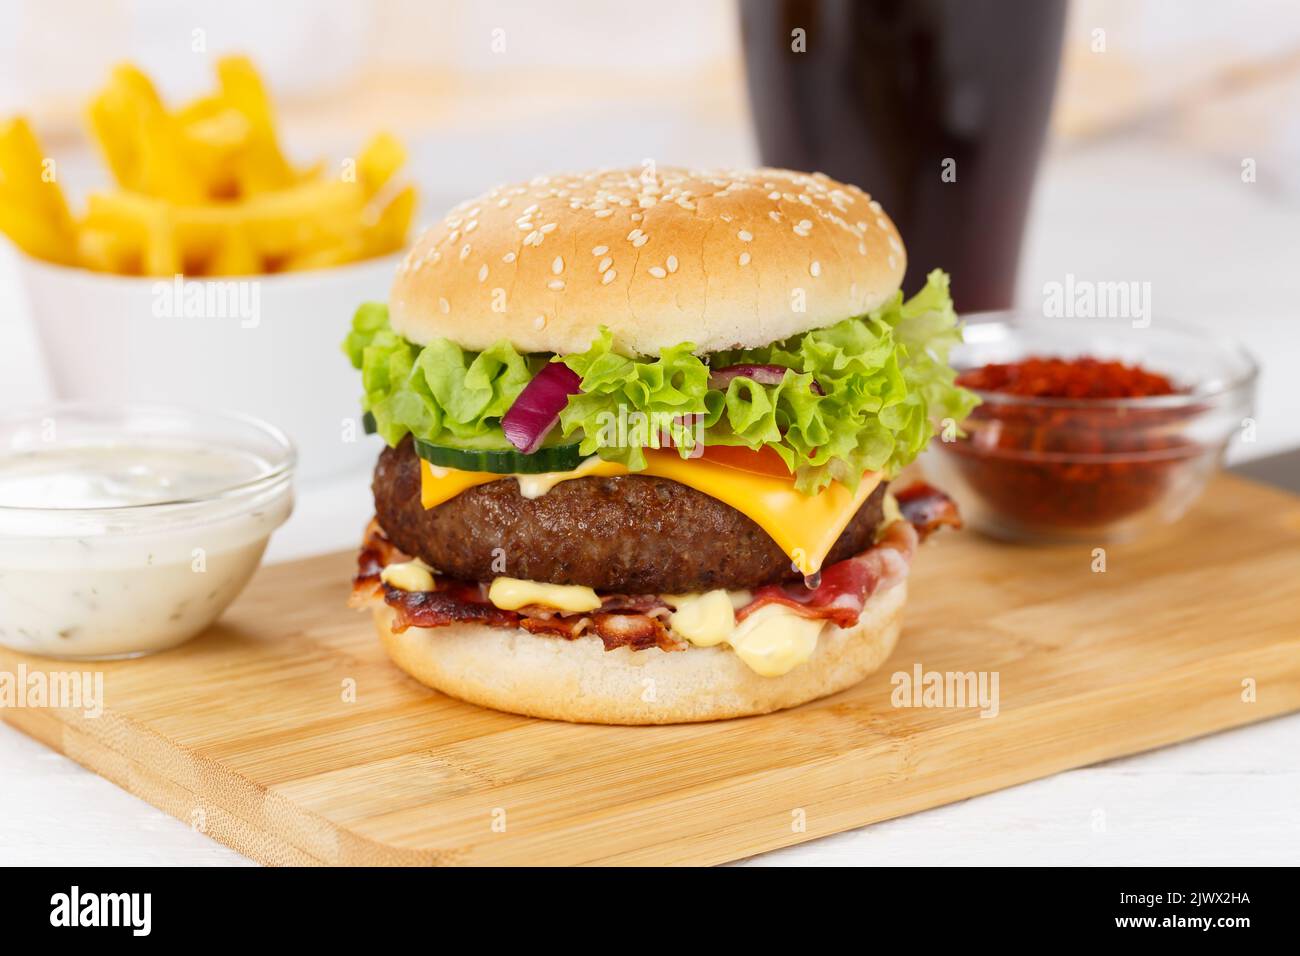 Hamburger Cheeseburger meal fastfood fast food with cola drink and French Fries on a wooden board menu Stock Photo